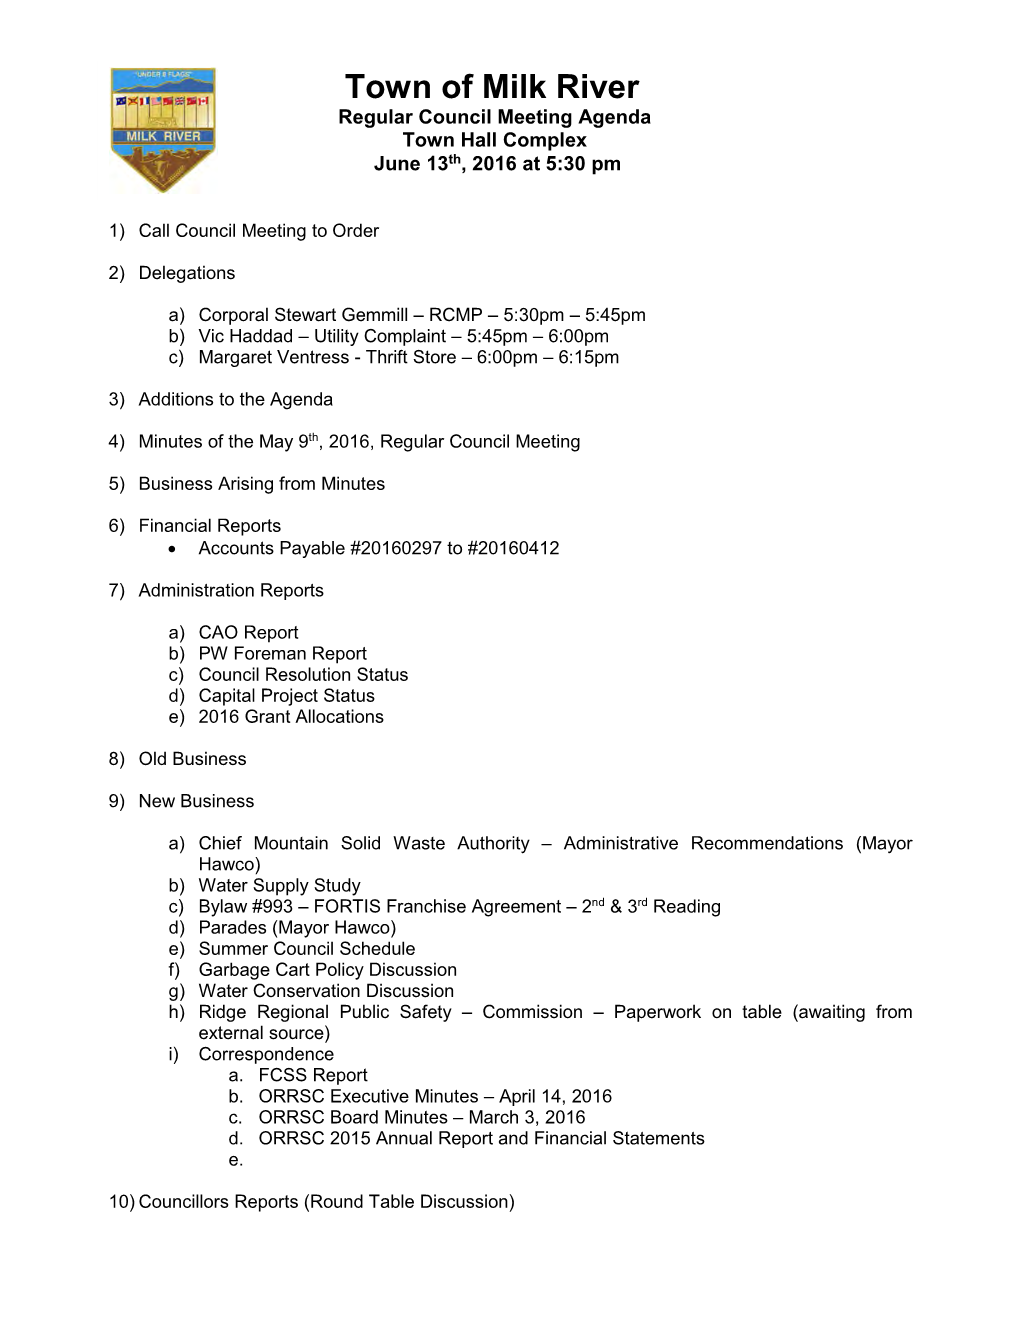 Council Meeting Agenda Town Hall Complex June 13Th, 2016 at 5:30 Pm